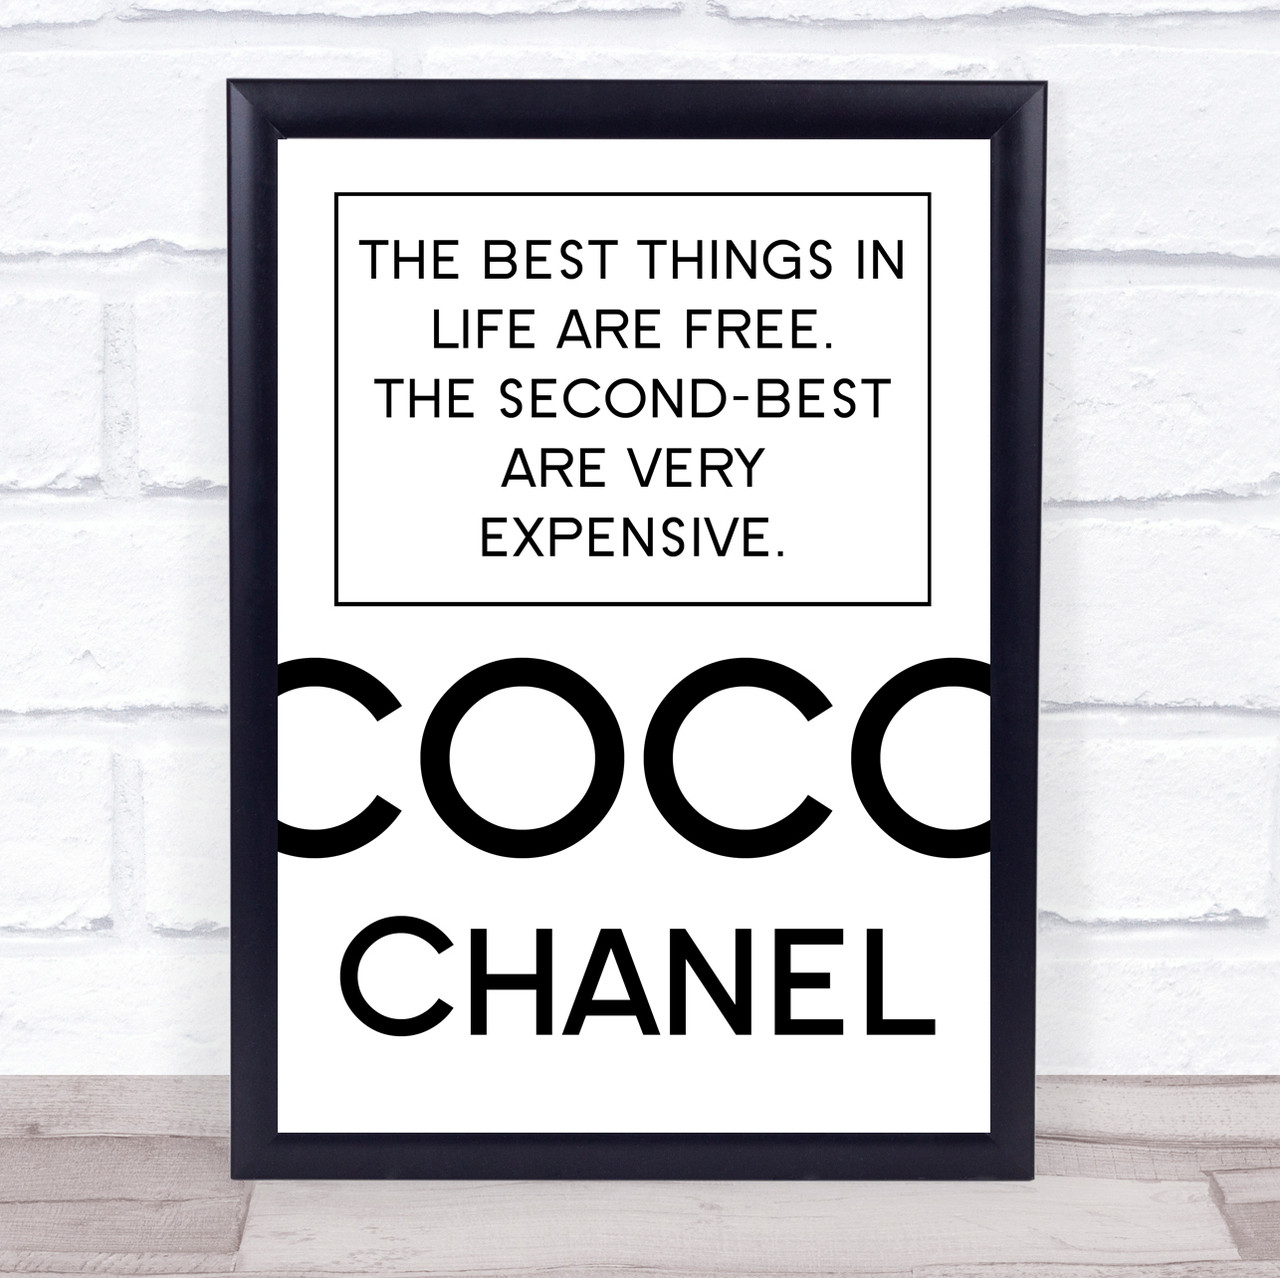 The best things in life are free  - Coco Chanel  - Home decor Qu –  ThePoshBible